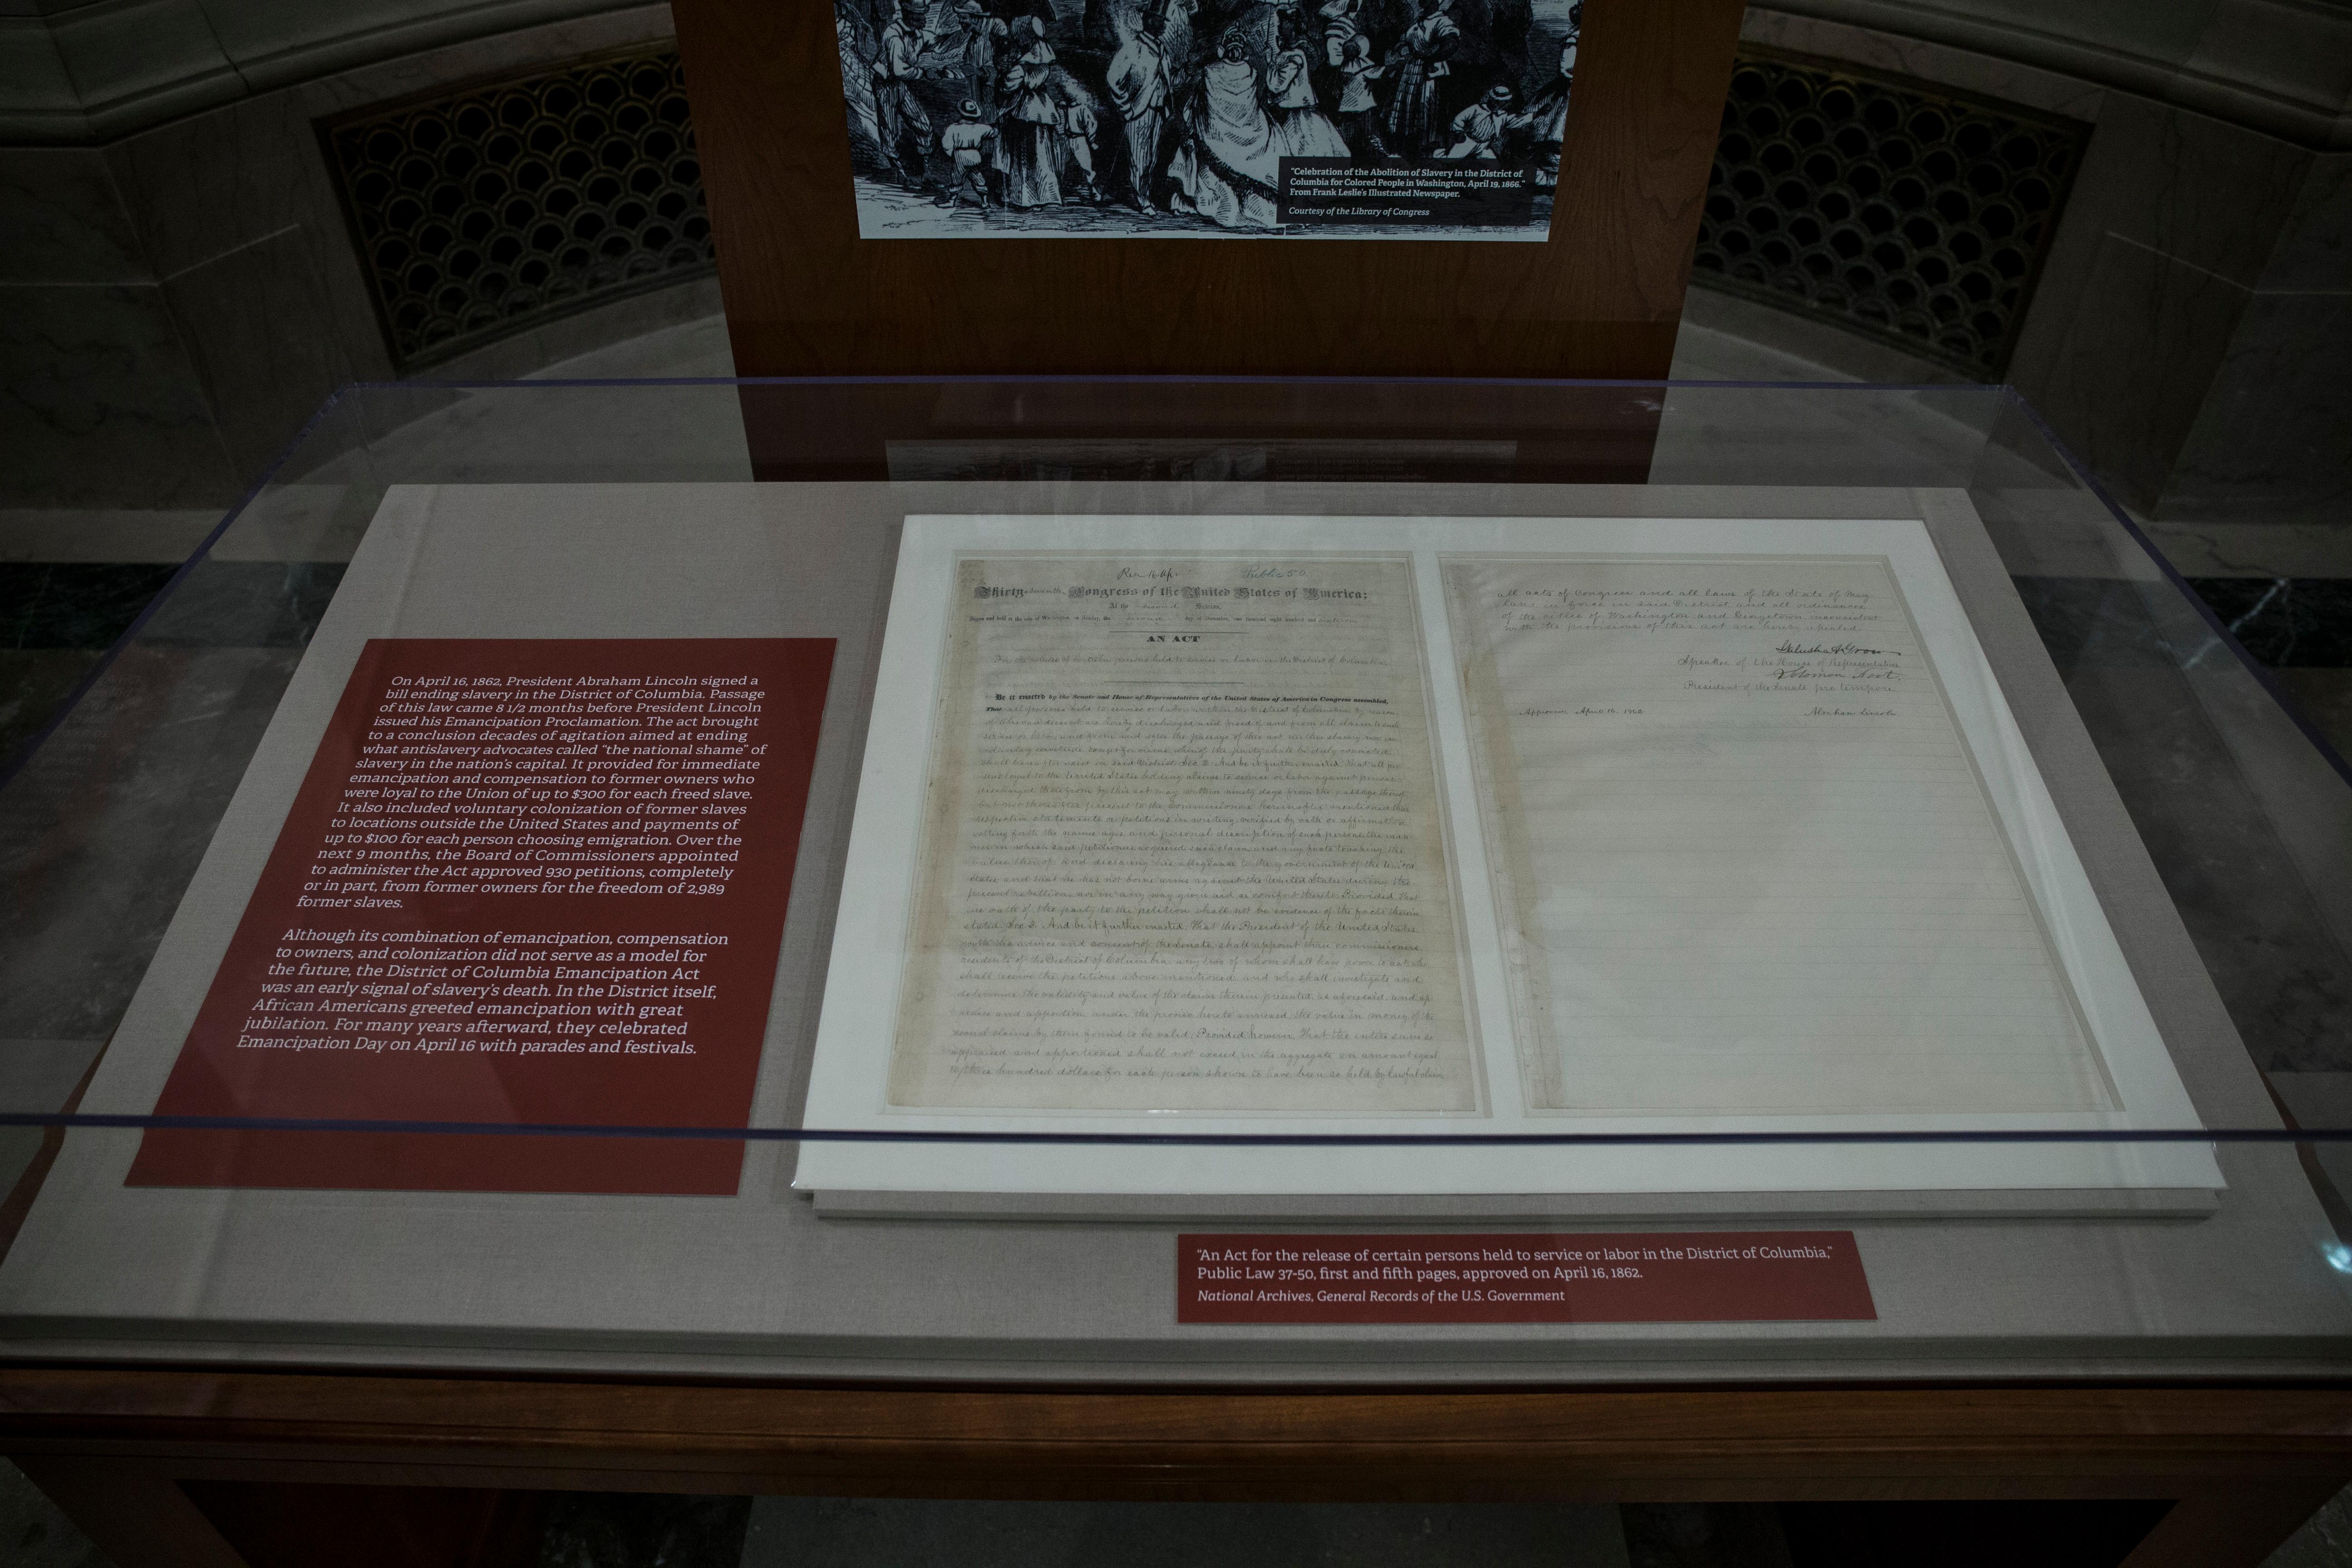 The Emancipation Act secured in a glass encasing.